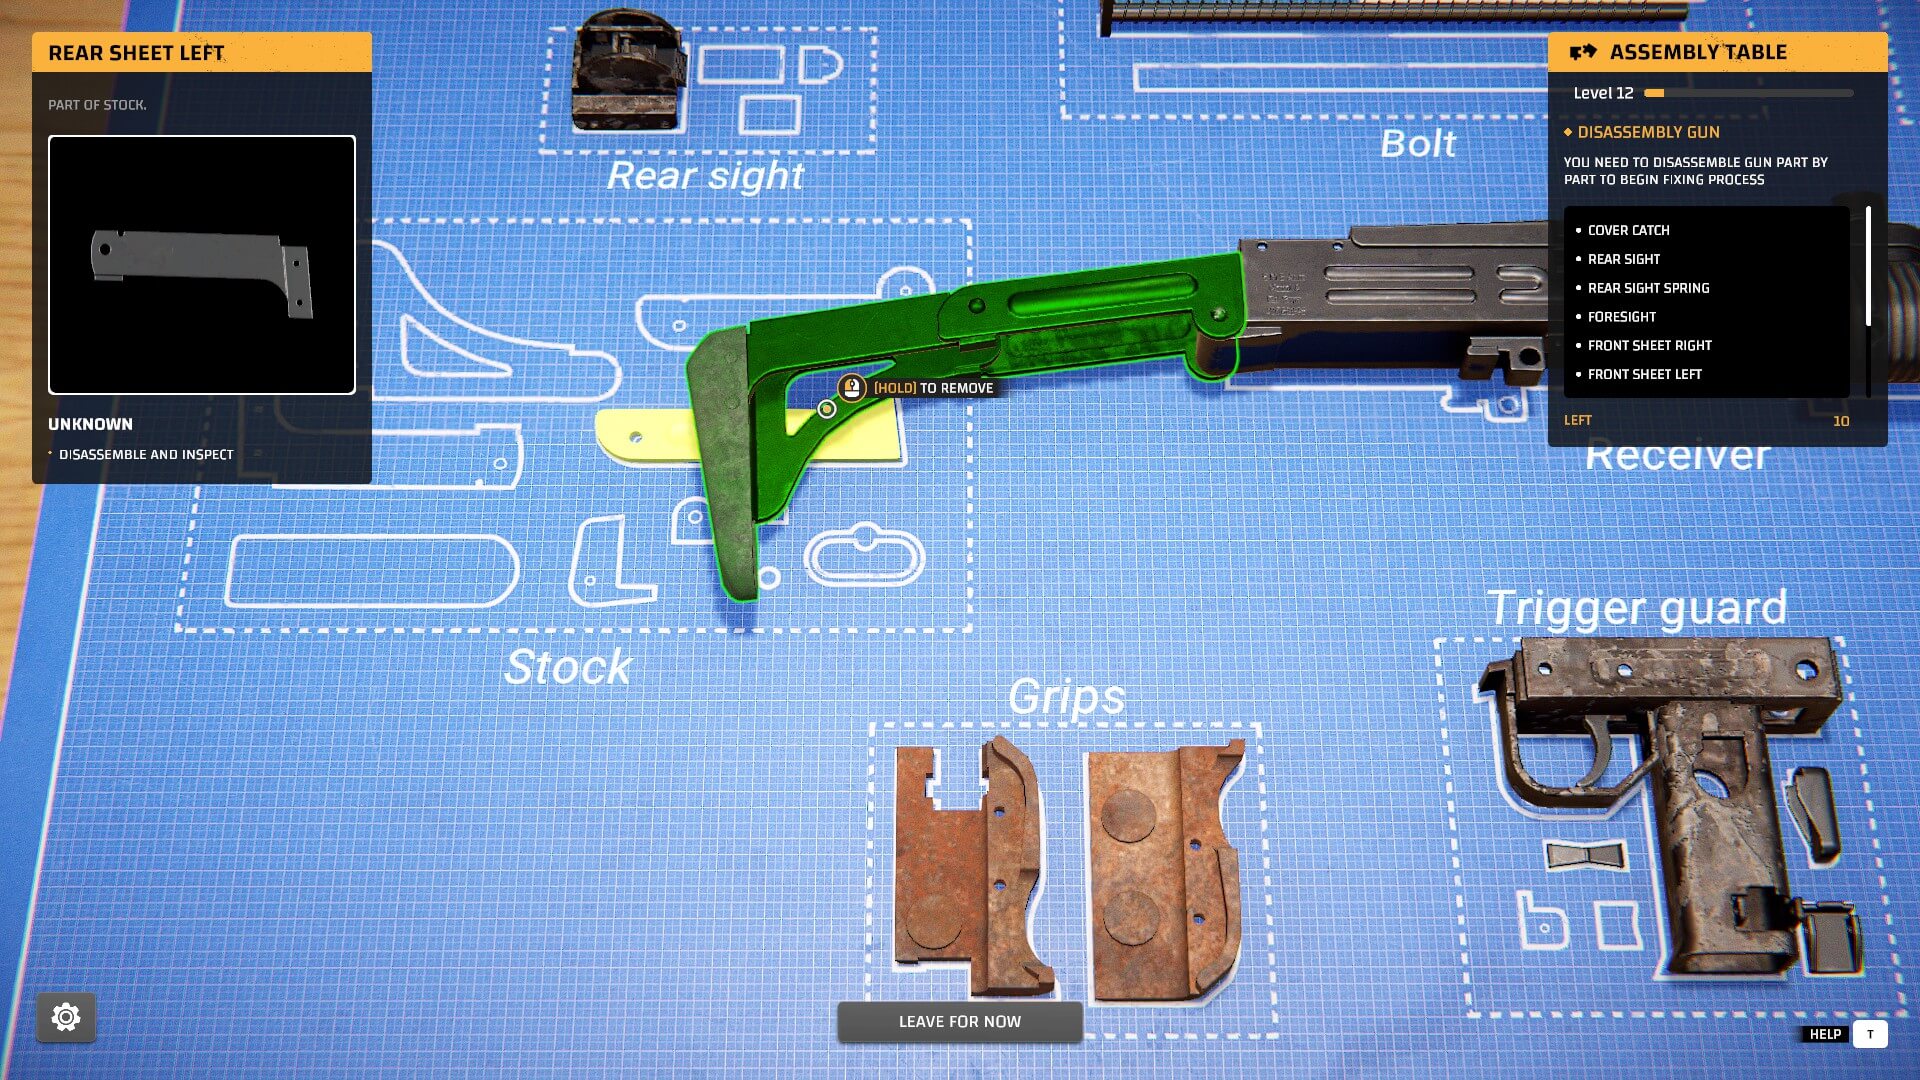 I am dismantling the Uzi's stock. The green means its the correct part to place there.